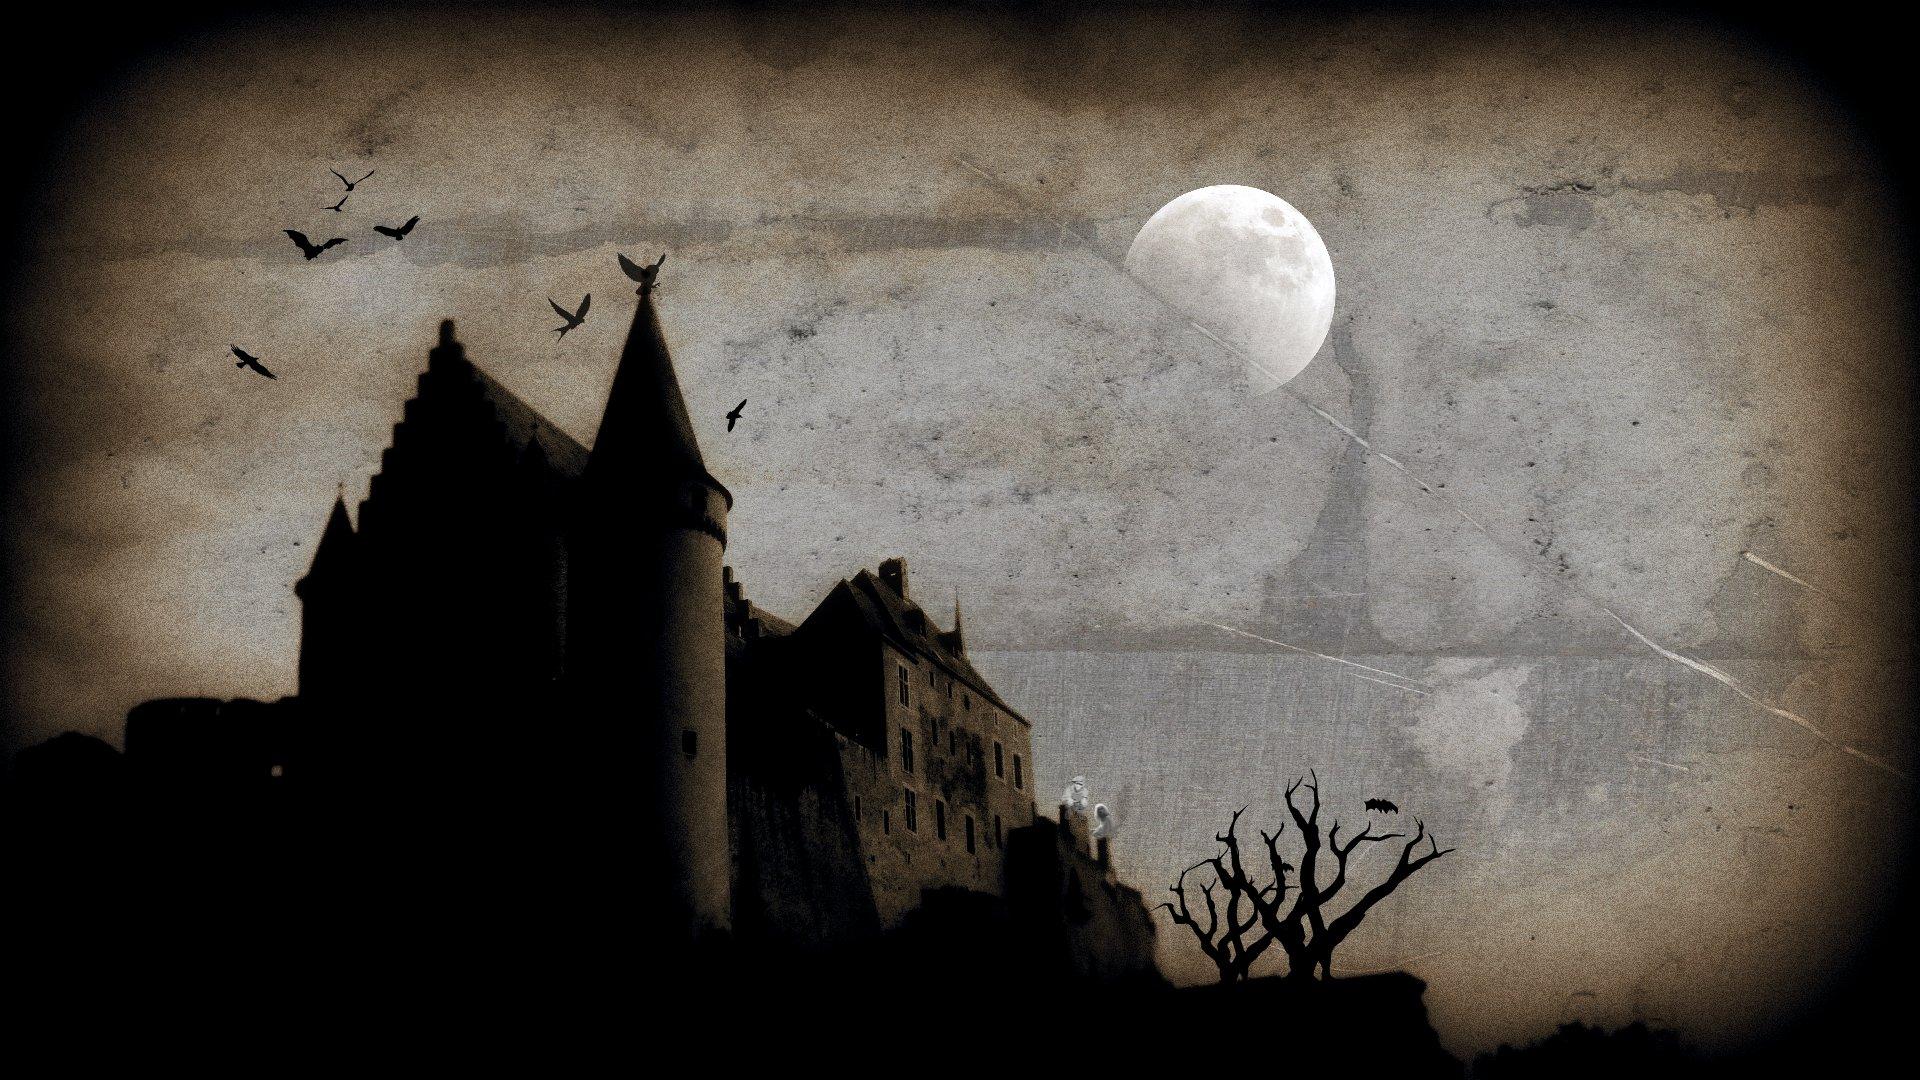 Wallpaper, night, horror, sky, Halloween, Moon, castle, texture, atmosphere, sad, grave, arch, evil, ghosts, cloud, scary, darkness, flickraward, computer wallpaper, black and white, monochrome photography, astronomical object, still life photography